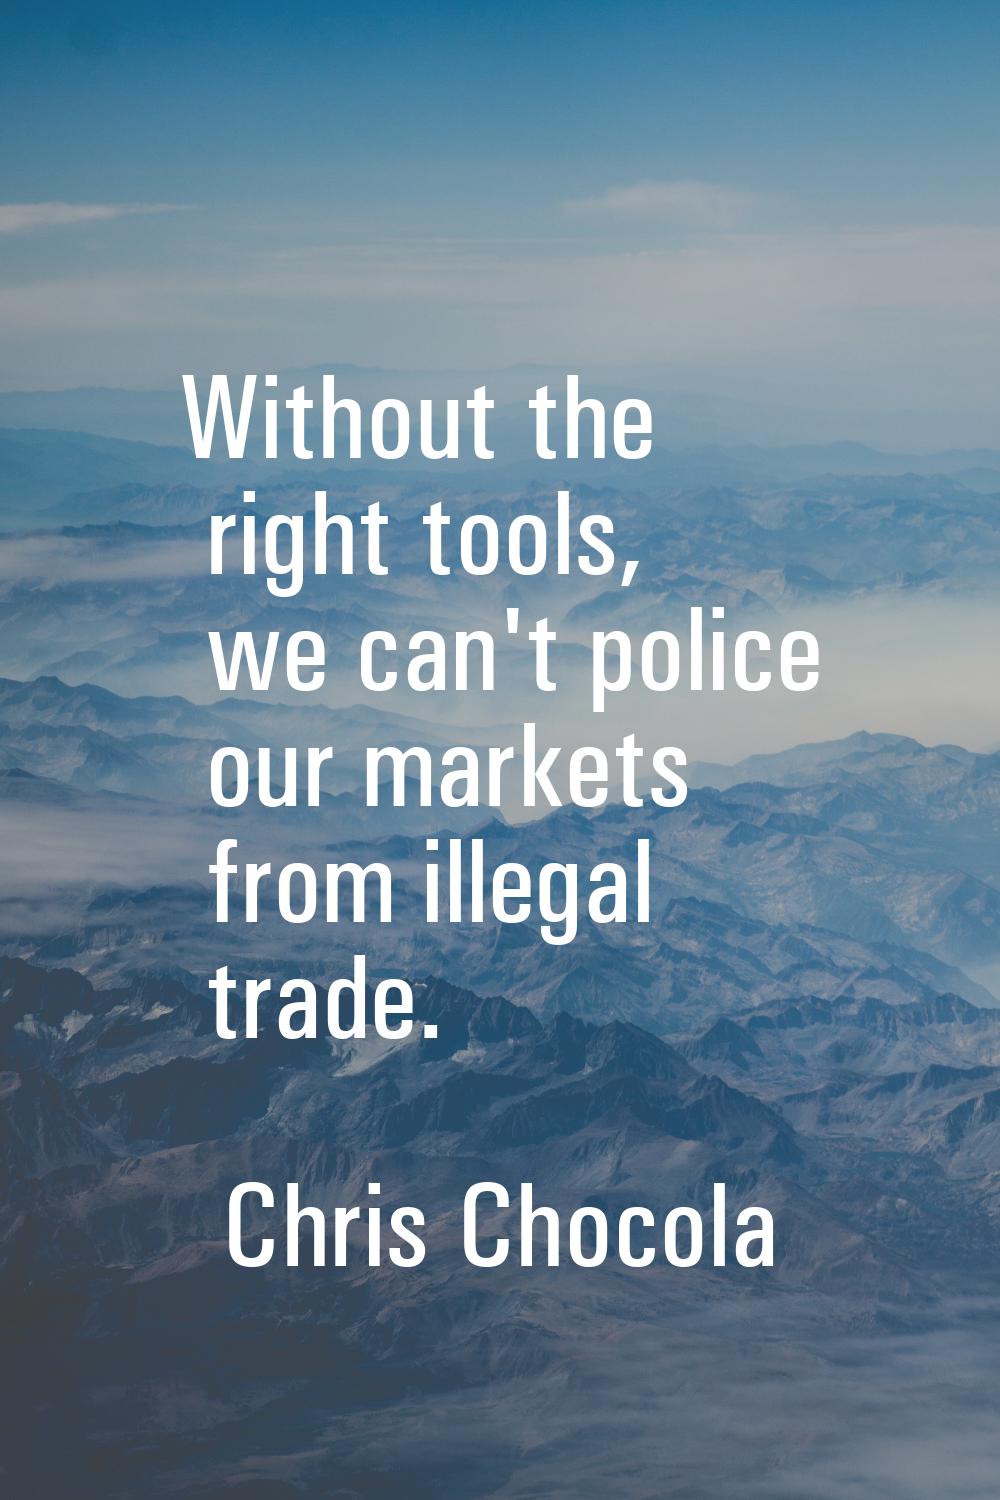 Without the right tools, we can't police our markets from illegal trade.